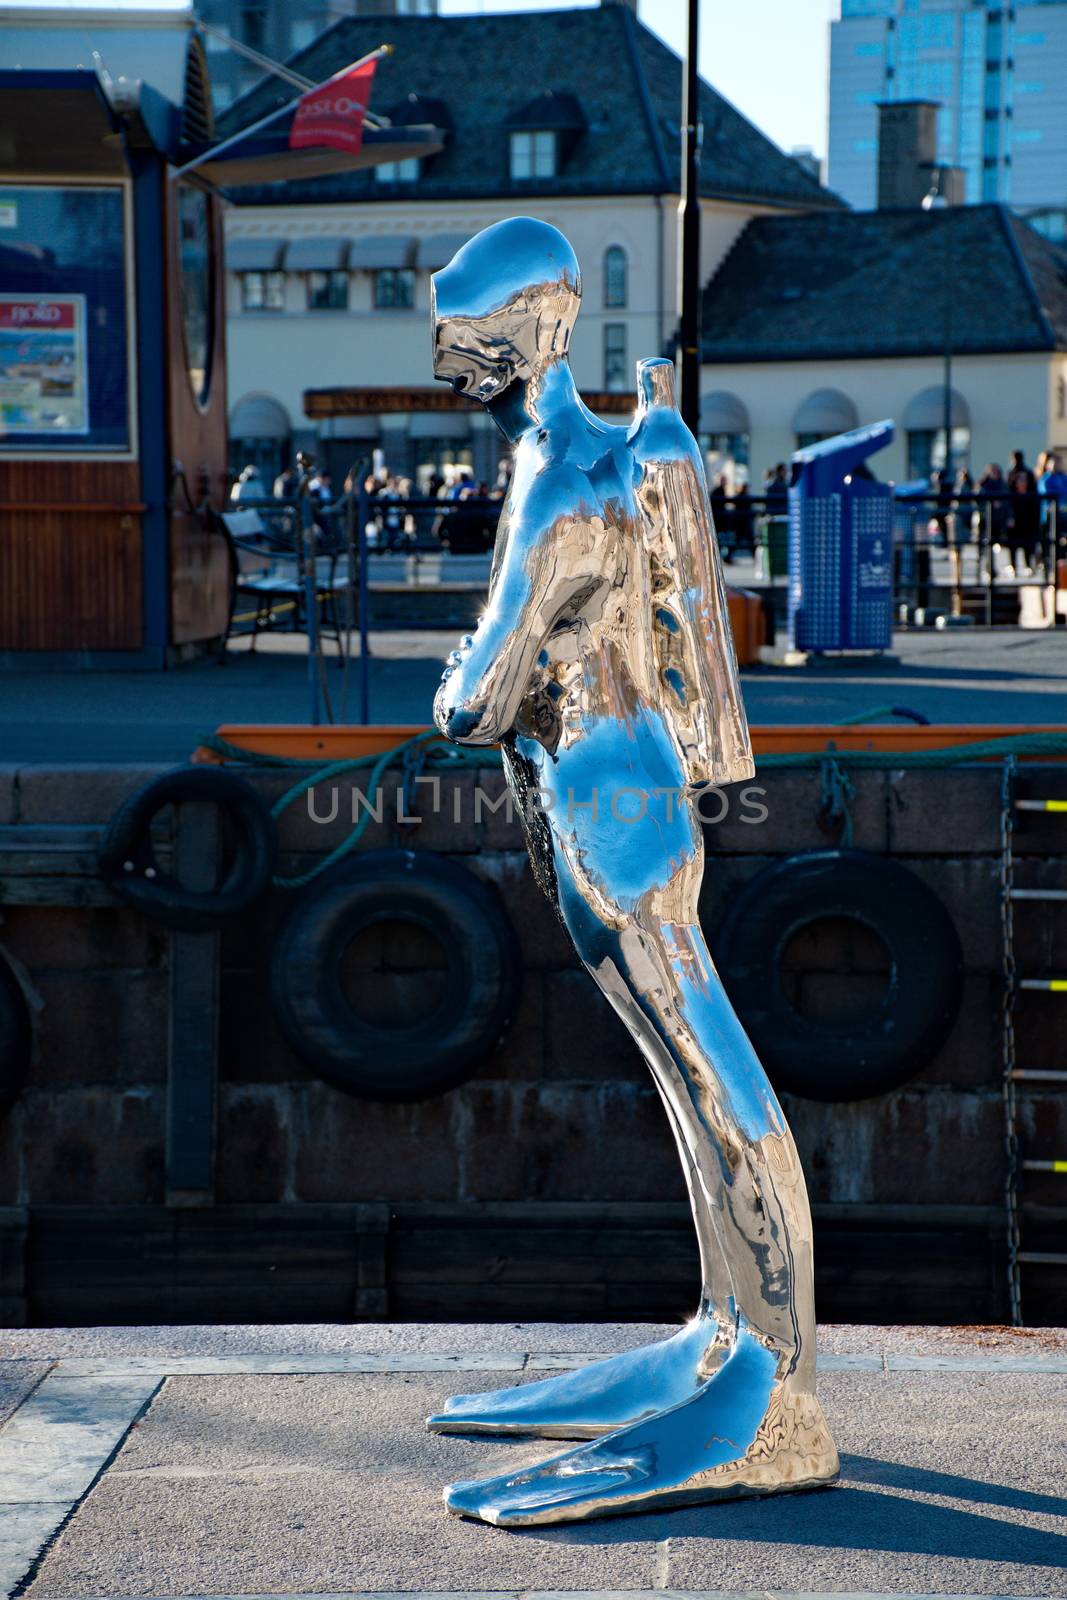 OSLO - MARCH 21: Contemporary scuplture of a diverr in Oslo harbour created by sculptor Ola Enstad